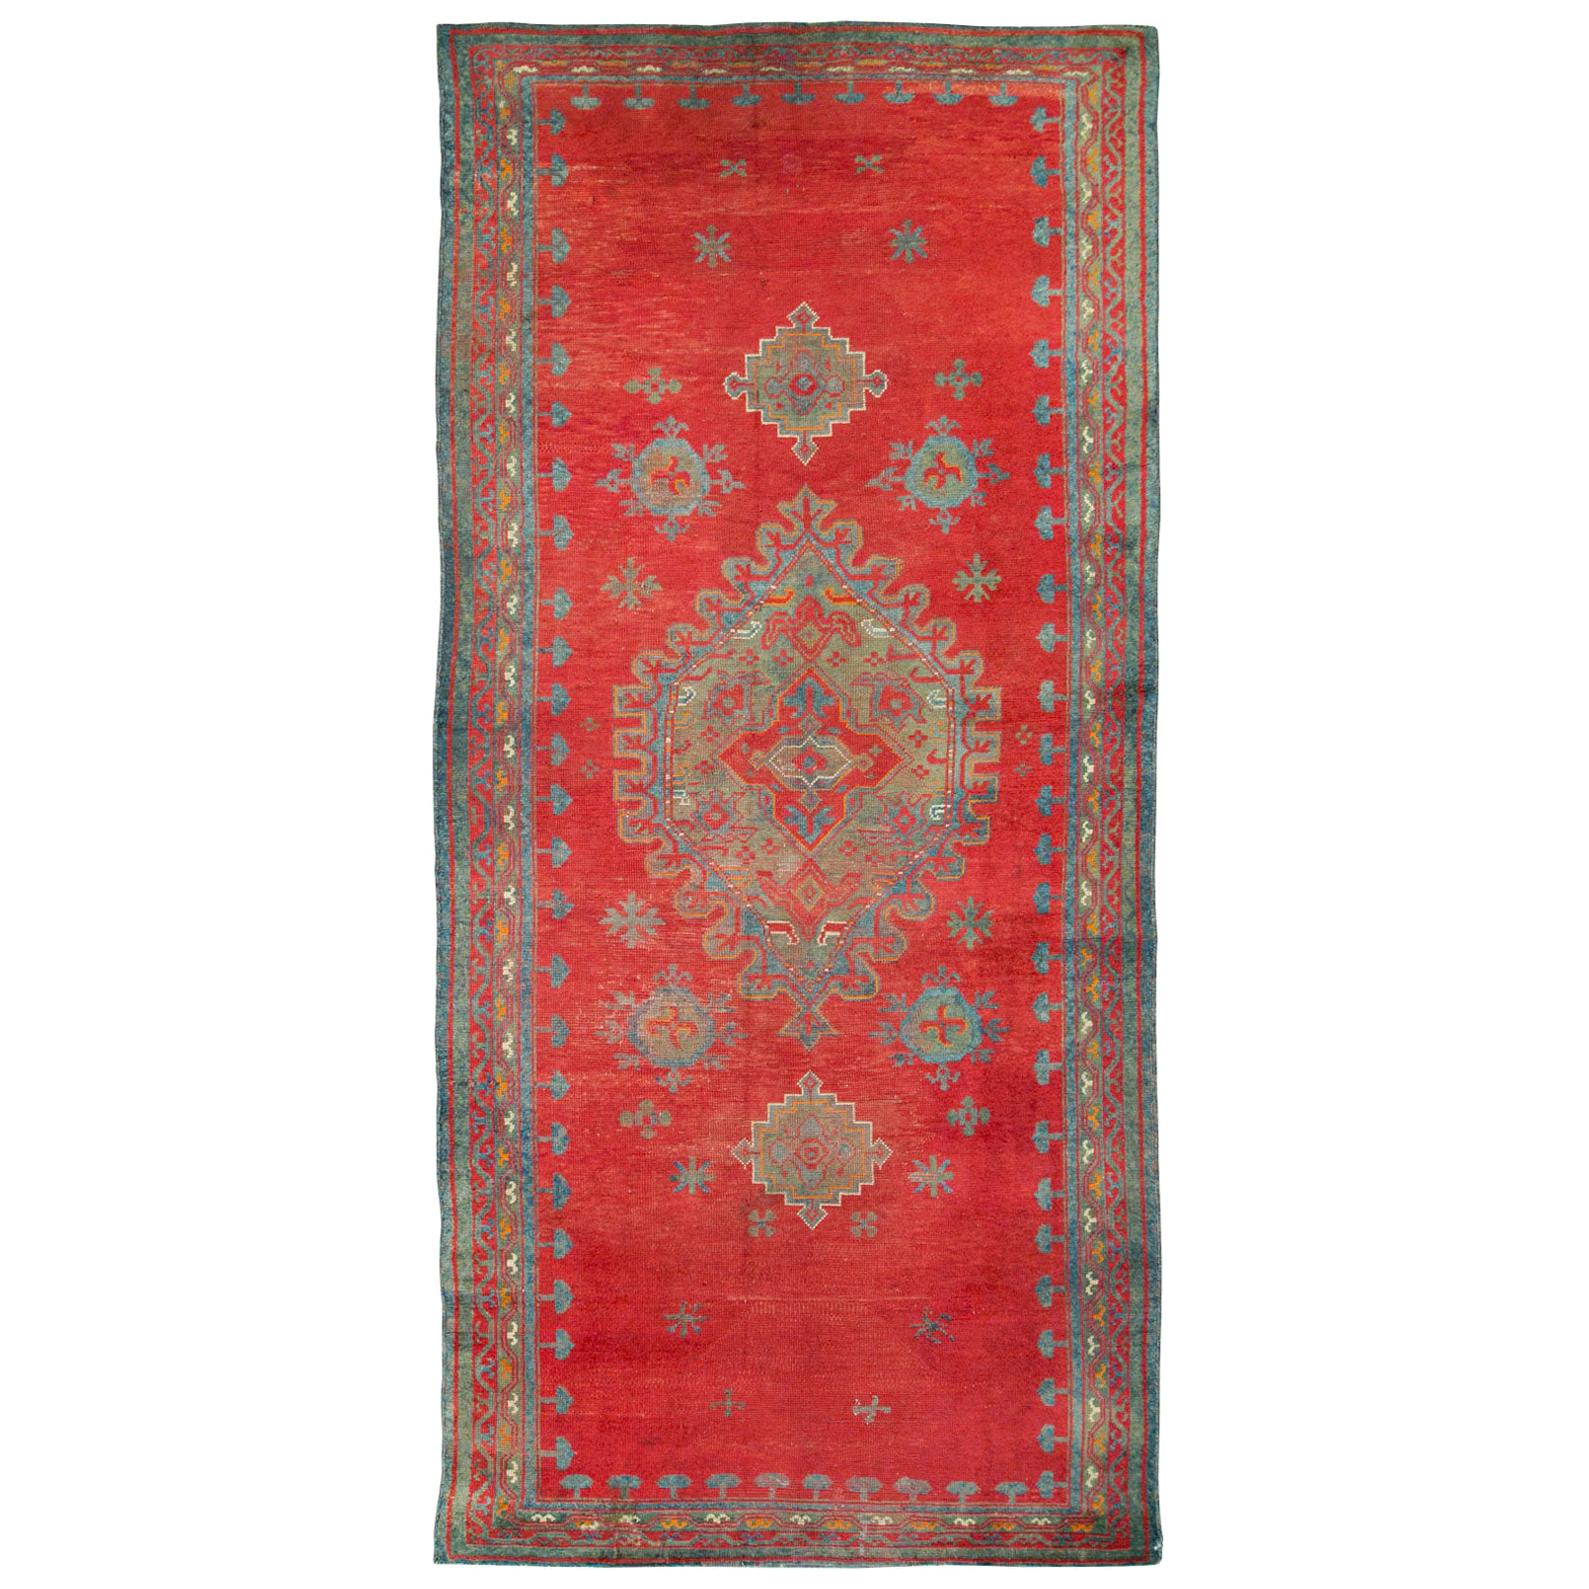 Early 20th Century Handmade Turkish Oushak Gallery Rug in Red